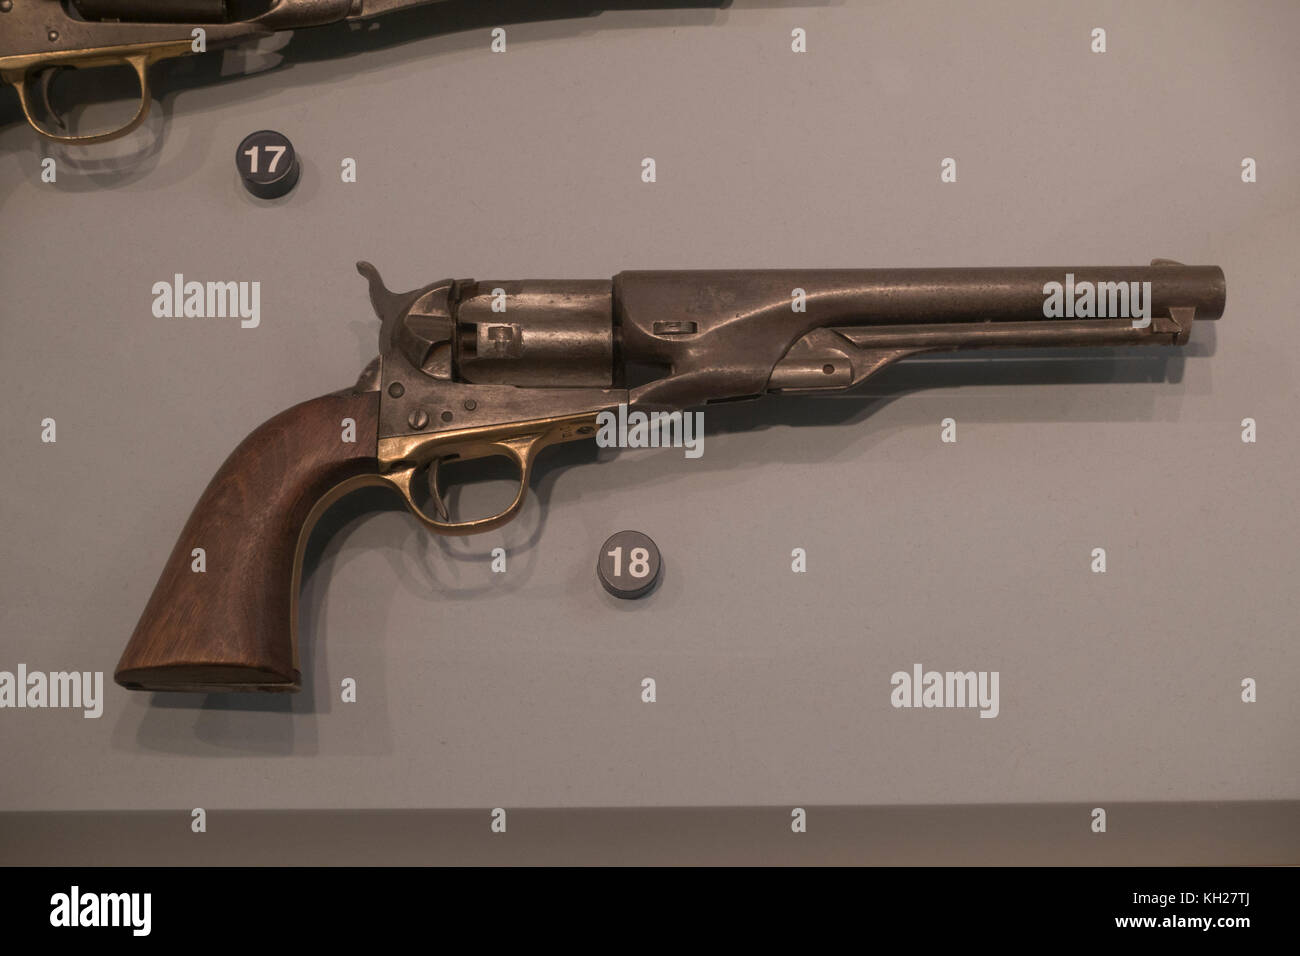 A full fluted cylinder model Army Colt revolver (c. 1862), National Civil War Museum, Lincoln Circle, Harrisburg, PA, United States Stock Photo